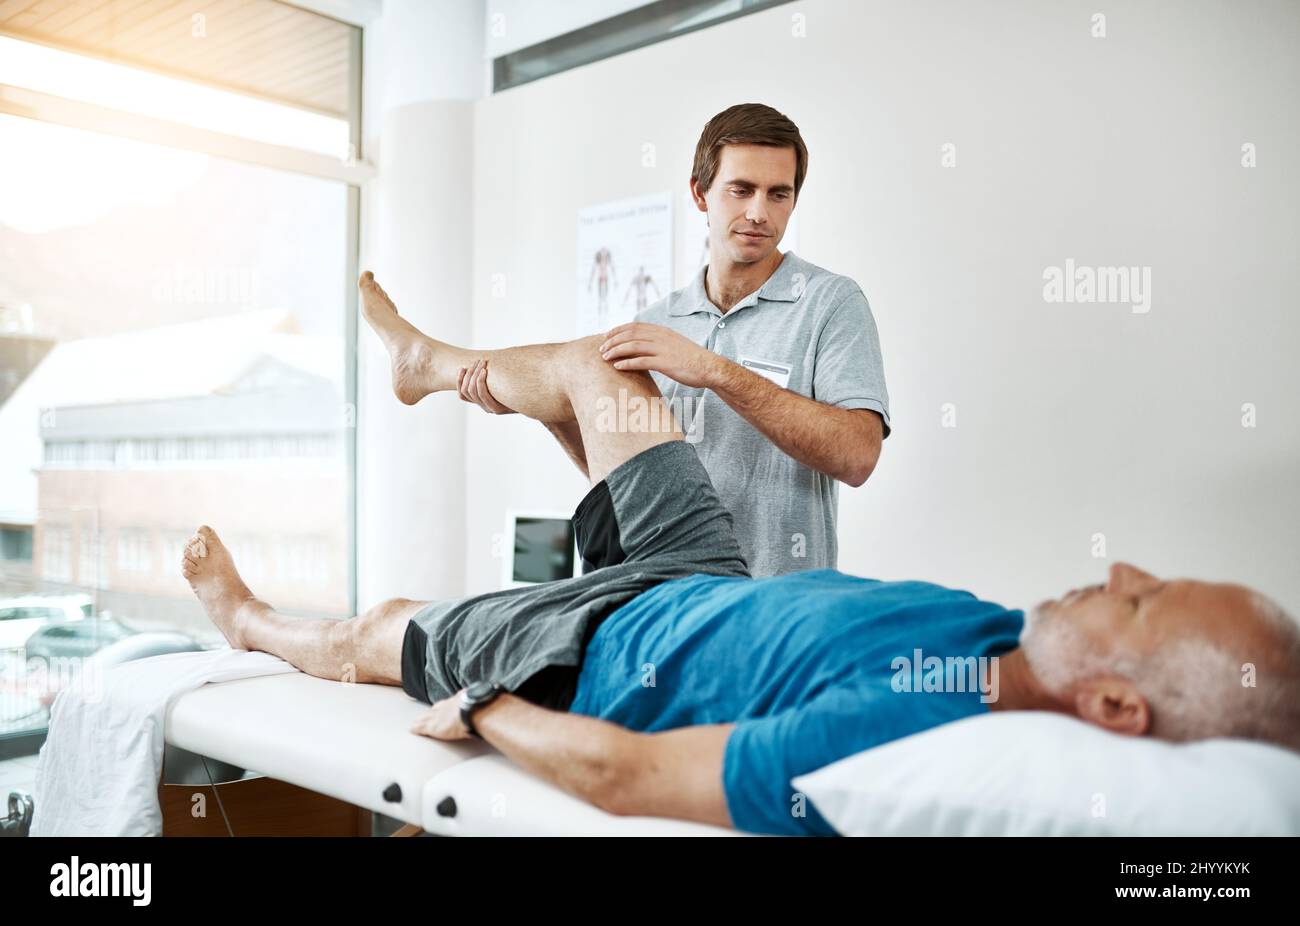 Client health is his only concern. Shot of a young male physiotherapist helping a client with leg exercises whos lying on a bed. Stock Photo